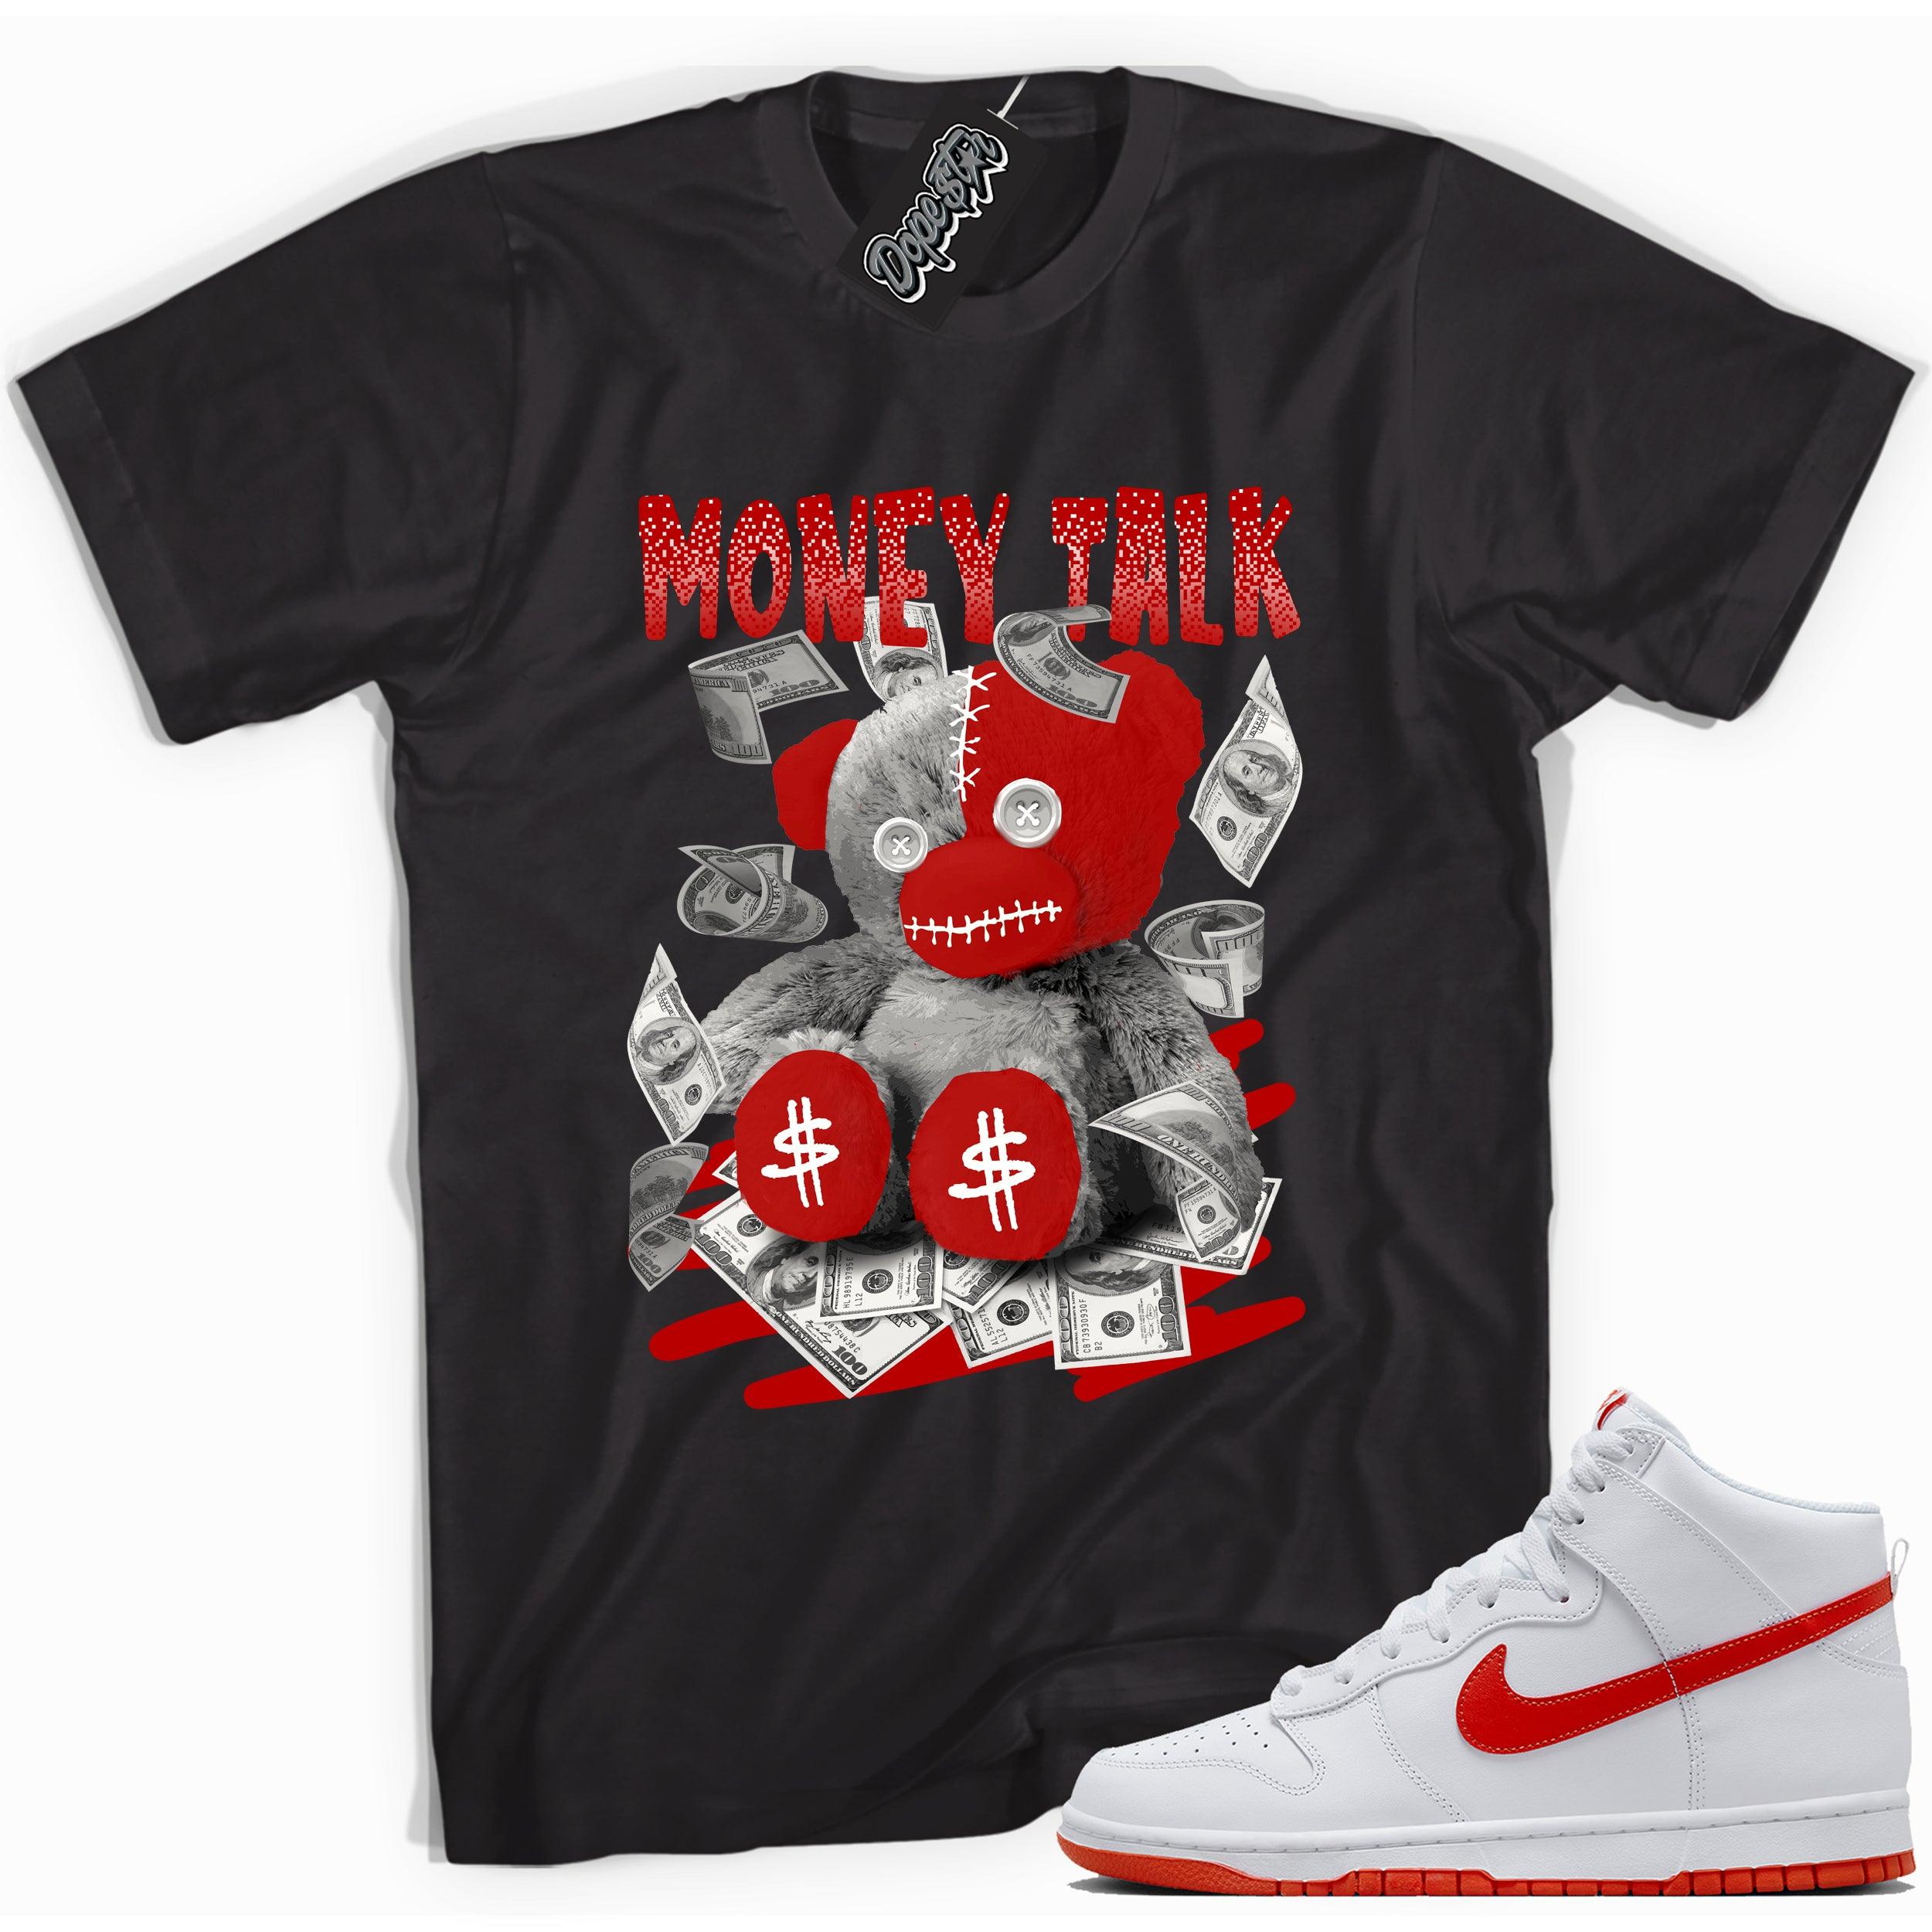 Cool black graphic tee with 'money talk bear' print, that perfectly matches Nike Dunk High White Picante Red sneakers.